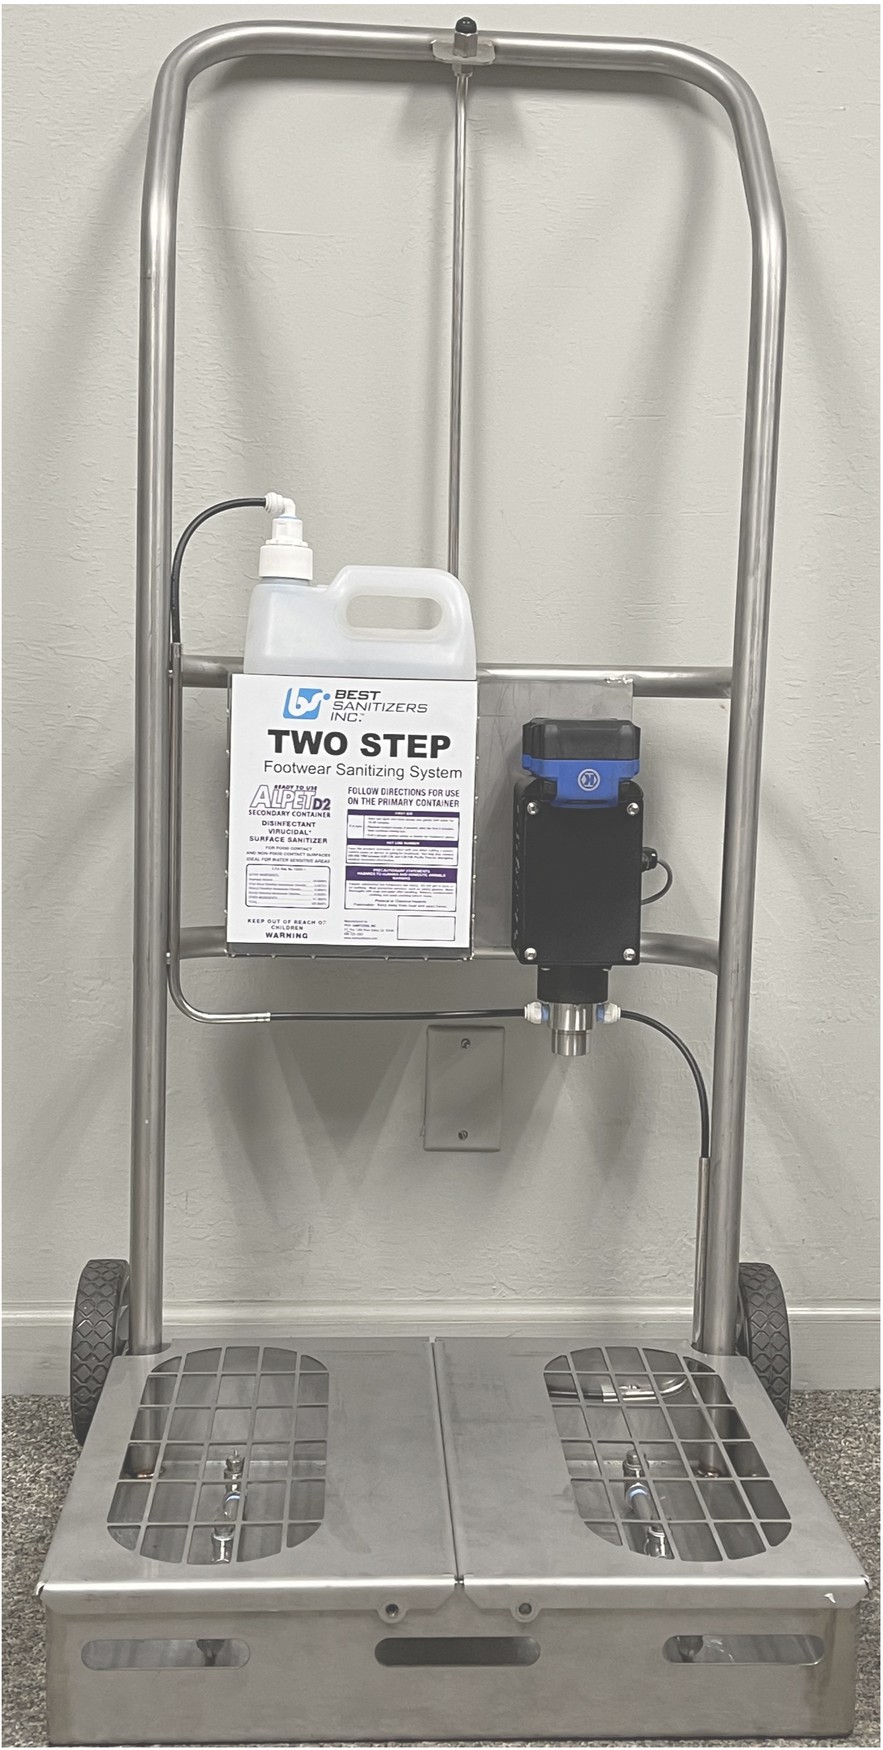 THE TWO STEP Completely self contained Portable Footwear Sanitizing System